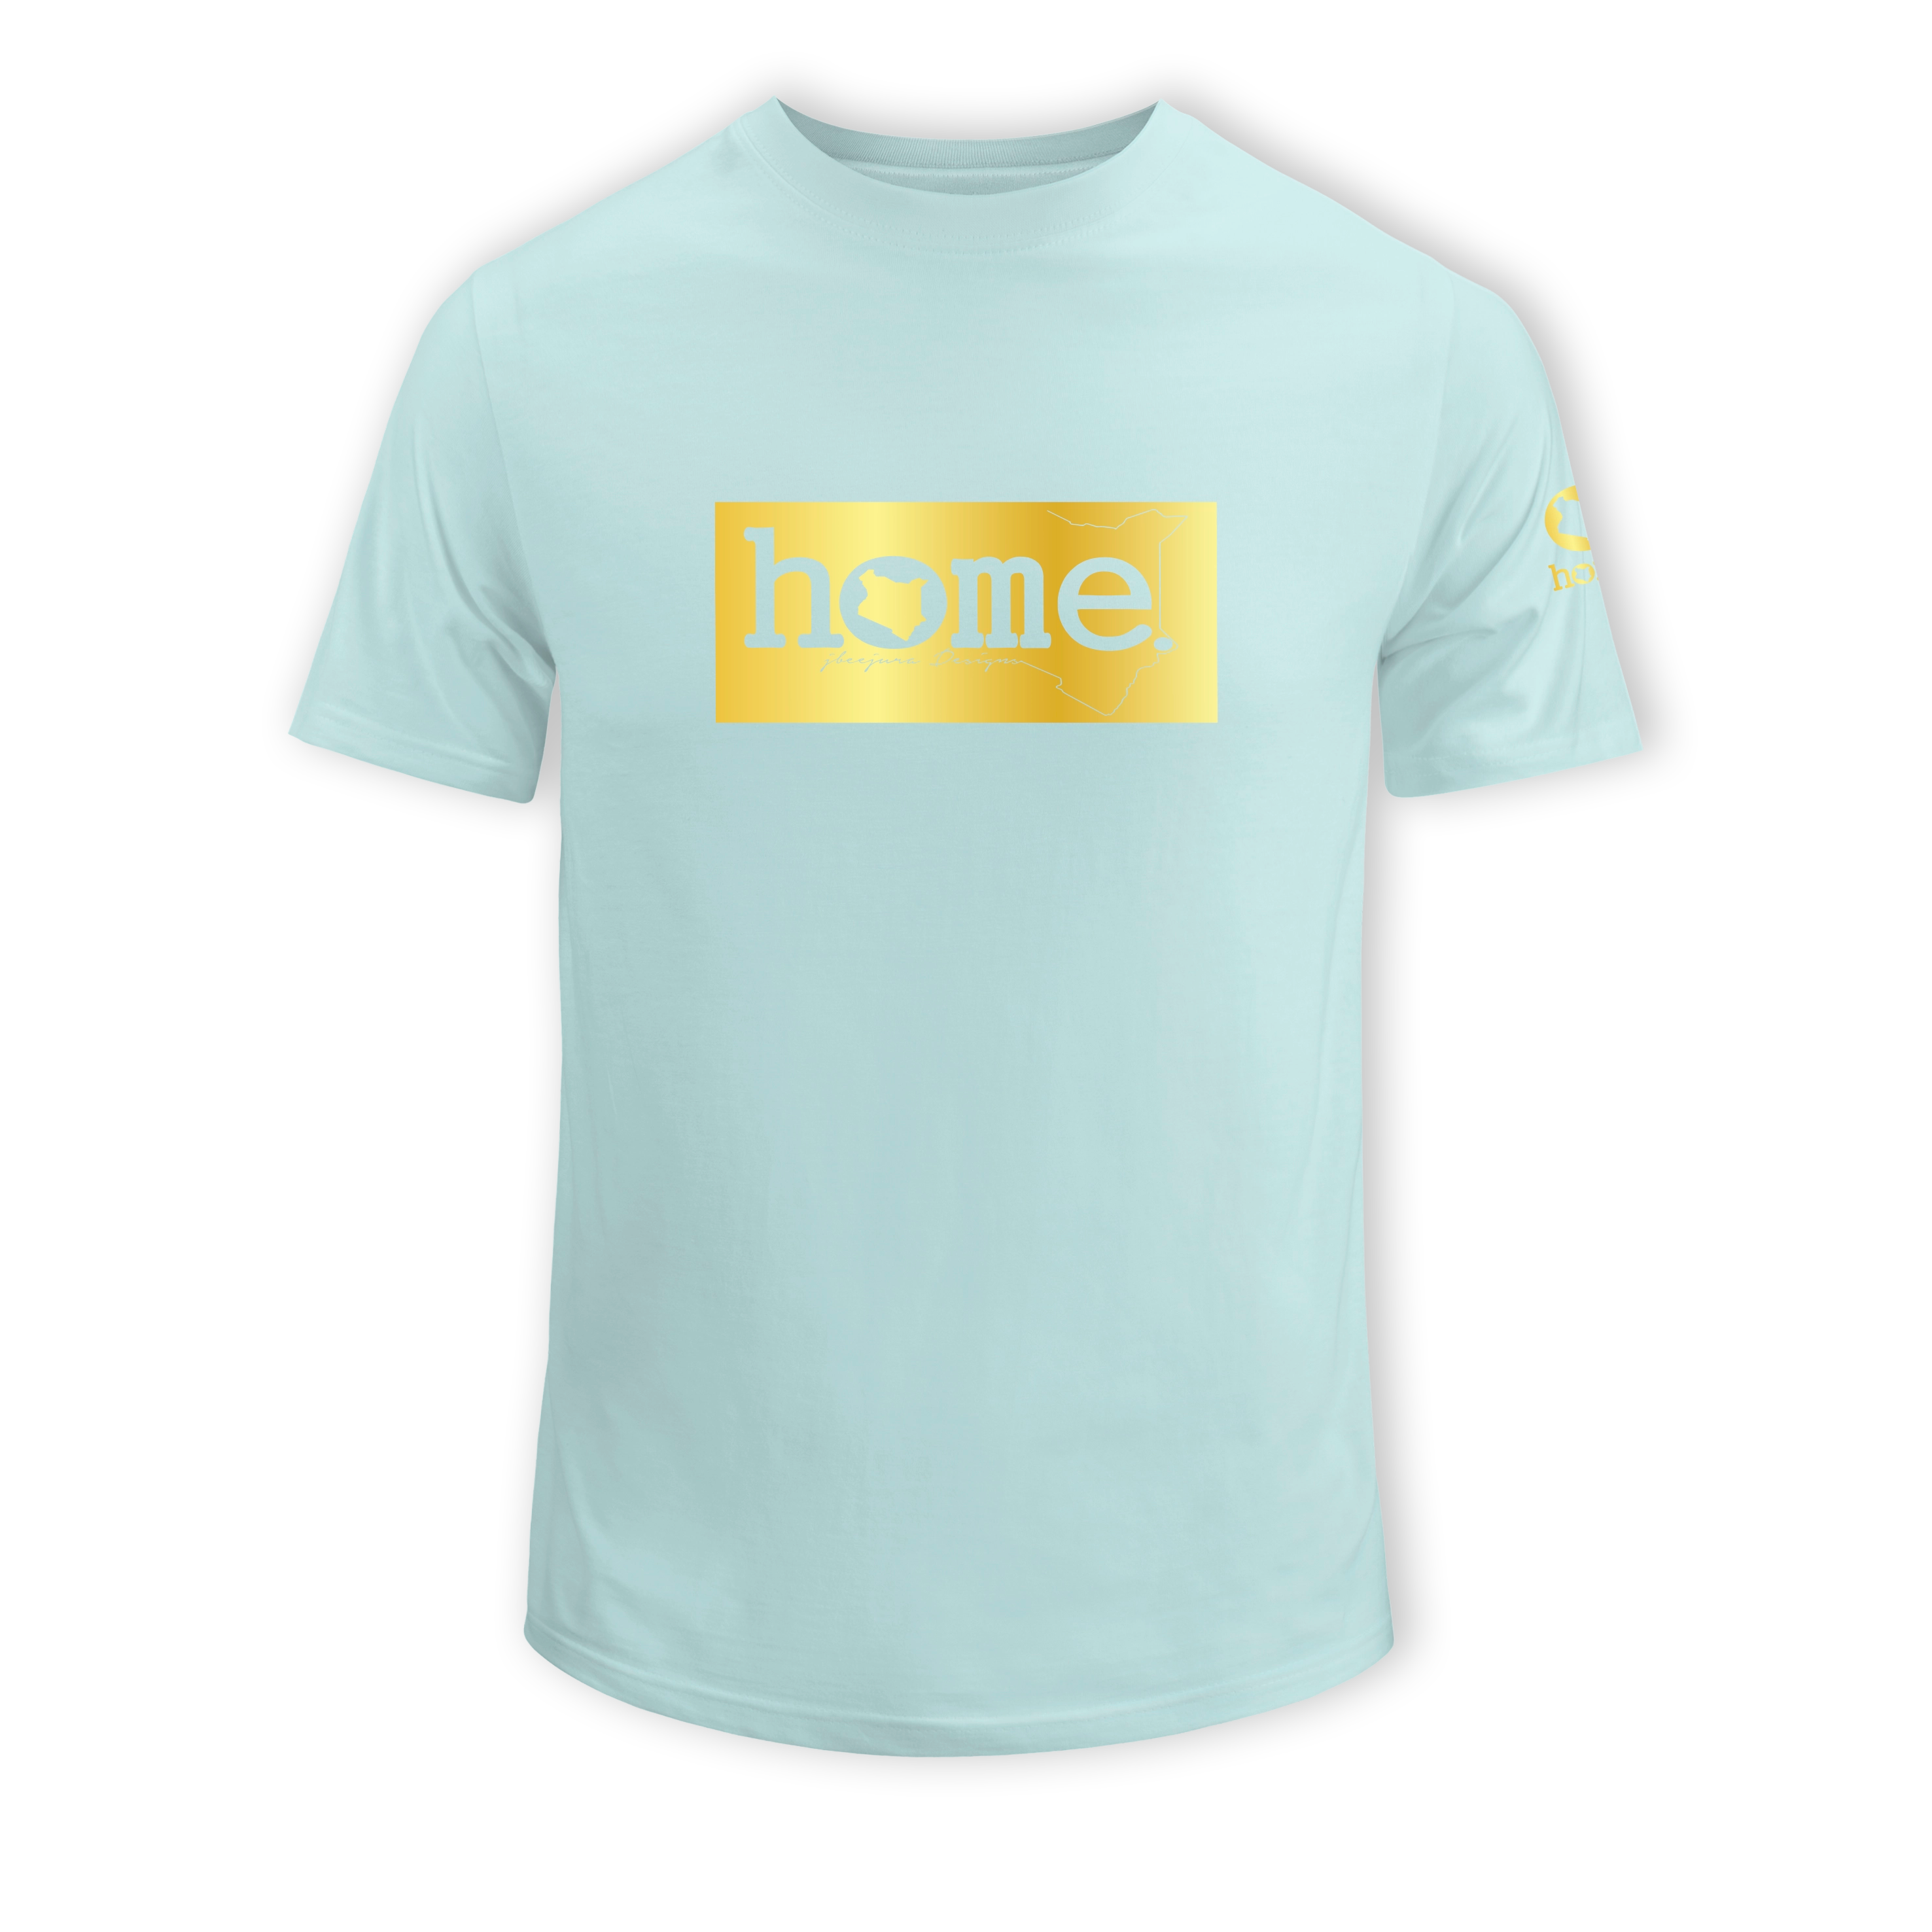 home_254 SHORT-SLEEVED MISTY BLUE T-SHIRT WITH A GOLD CLASSIC PRINT – COTTON PLUS FABRIC